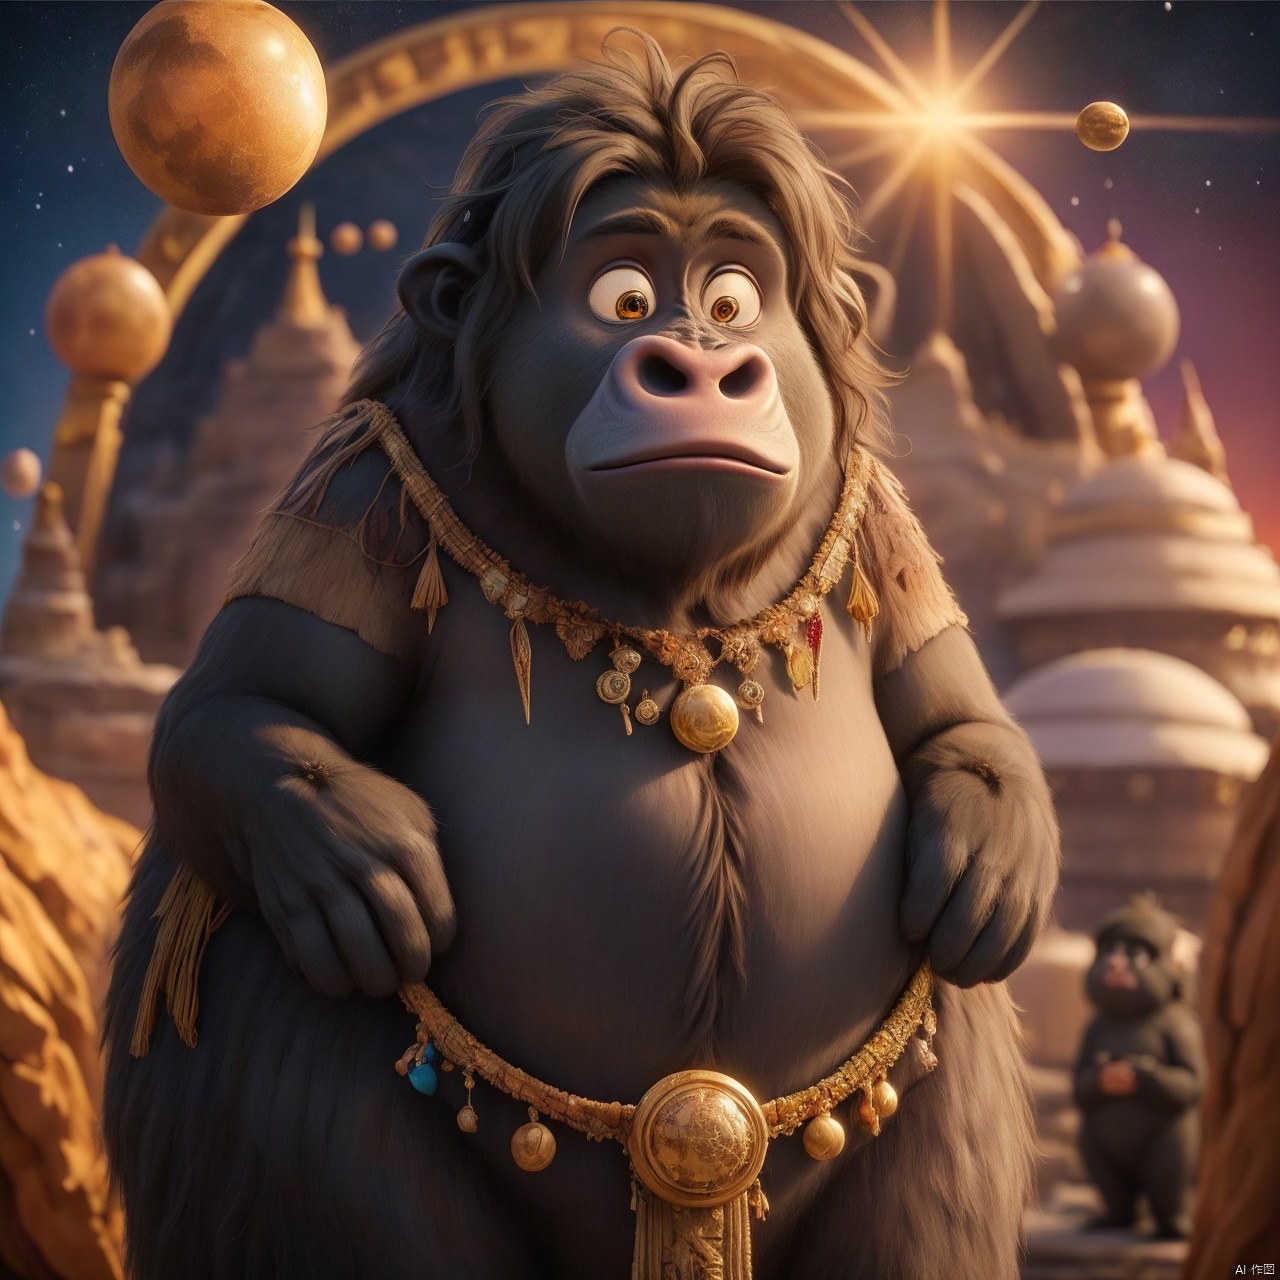  master piece, high quality, 
fat cute gorilla ,
 with a belly, fat,cute, wu,In space,
Planets made of gold and gemstone materials,, gold and gemstones,Sunrise,
Holy radiance,The solar system made of gold and gemstones, shine eyes01,A glowing planet, Depth of Field